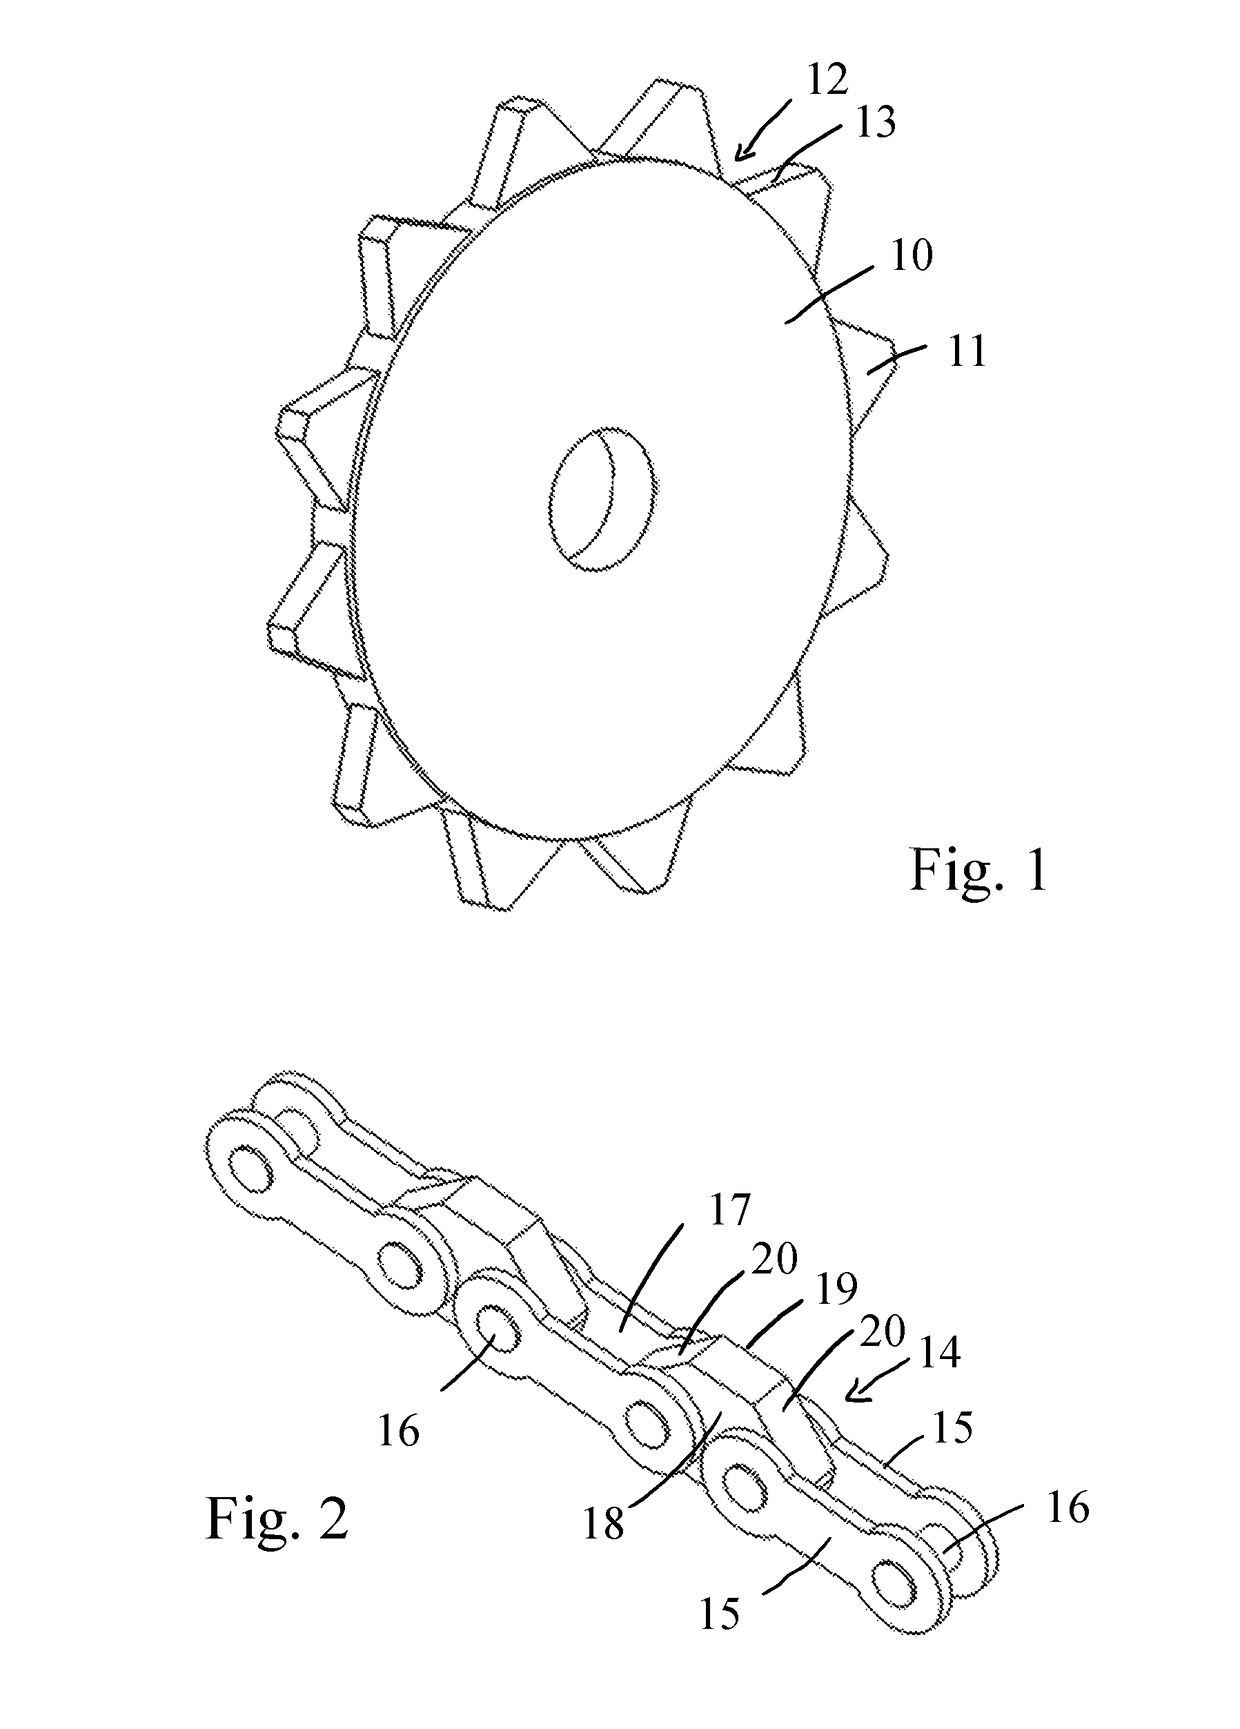 Drive system with a drive chain guided over a sprocket